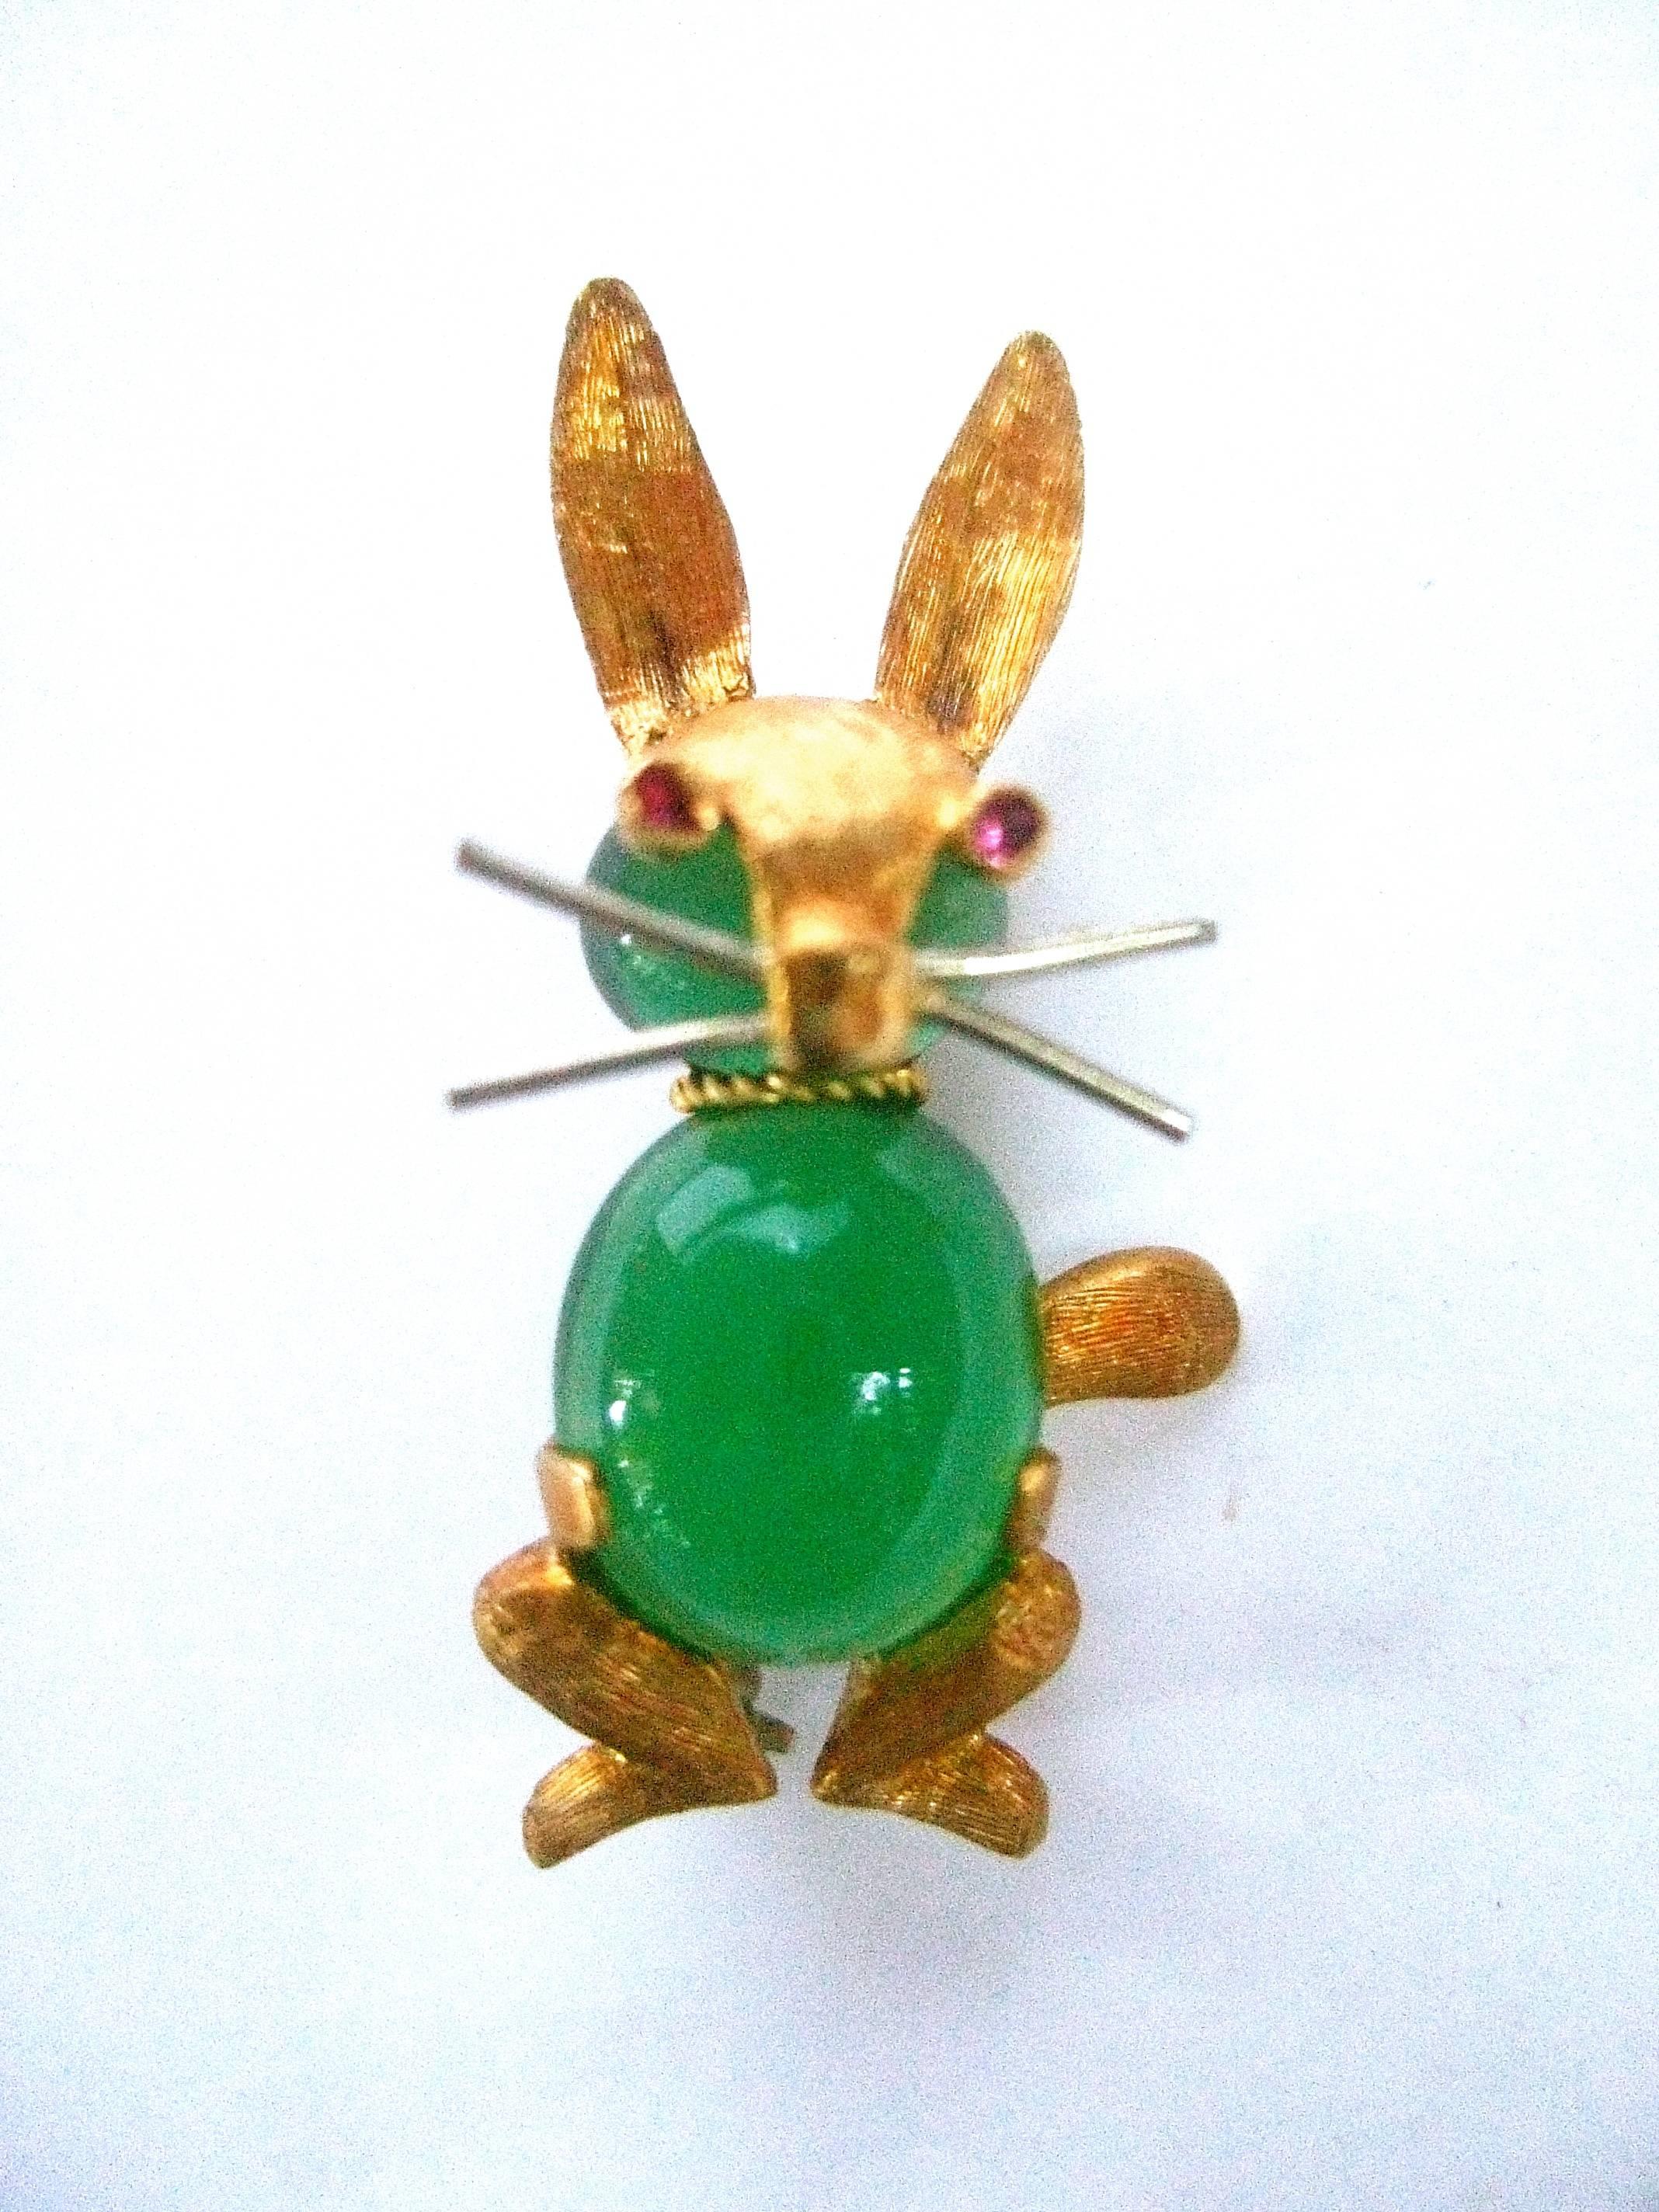 Charming 18k gold semi precious diminutive Italian rabbit scatter pin c 1960
The adorable tiny rabbit is embellished with an emerald green 
color semi precious glass cabochon jelly belly body

The eyes are distinguished with tiny pink semi precious